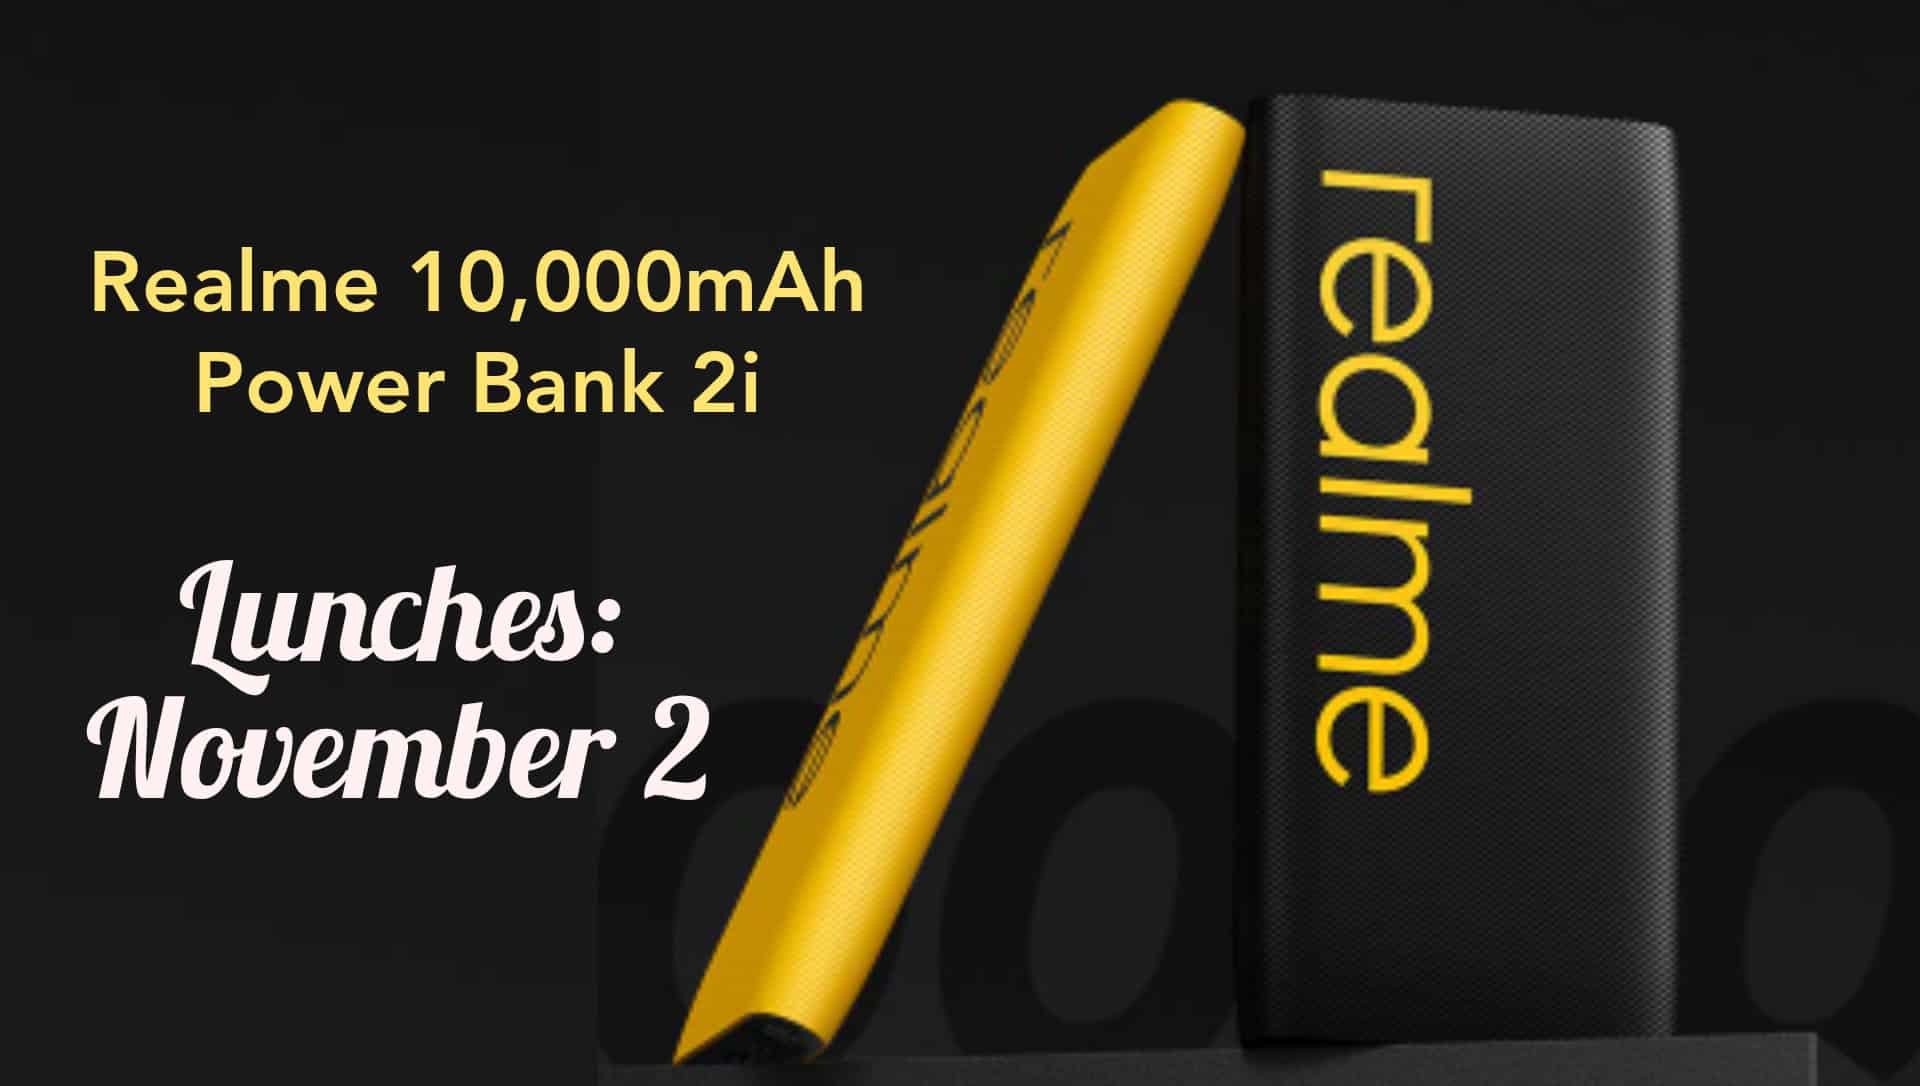 Realme Launches New 10,000mAh Power Bank 2i on November 2, To Go on Sale From November 6